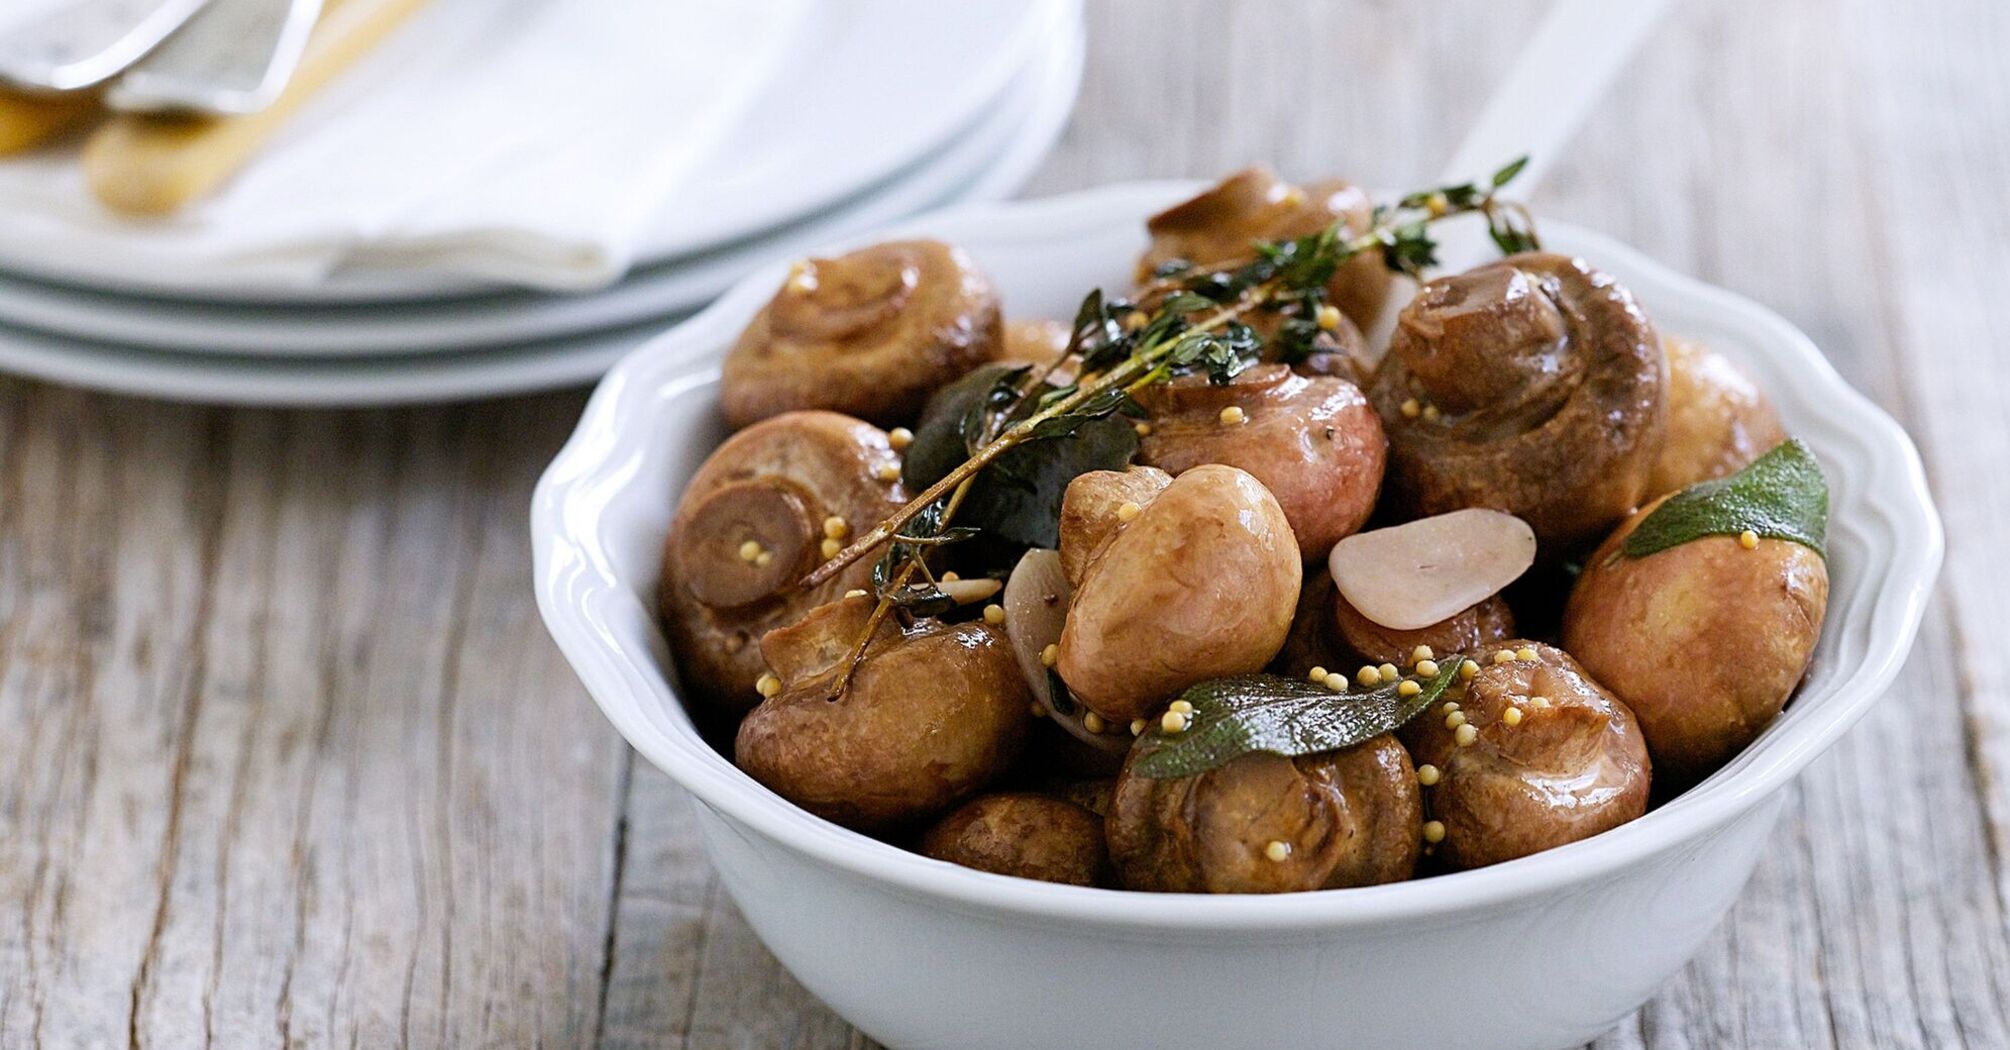 Pickled mushrooms in 10 minutes: recipe for a delicious appetizer